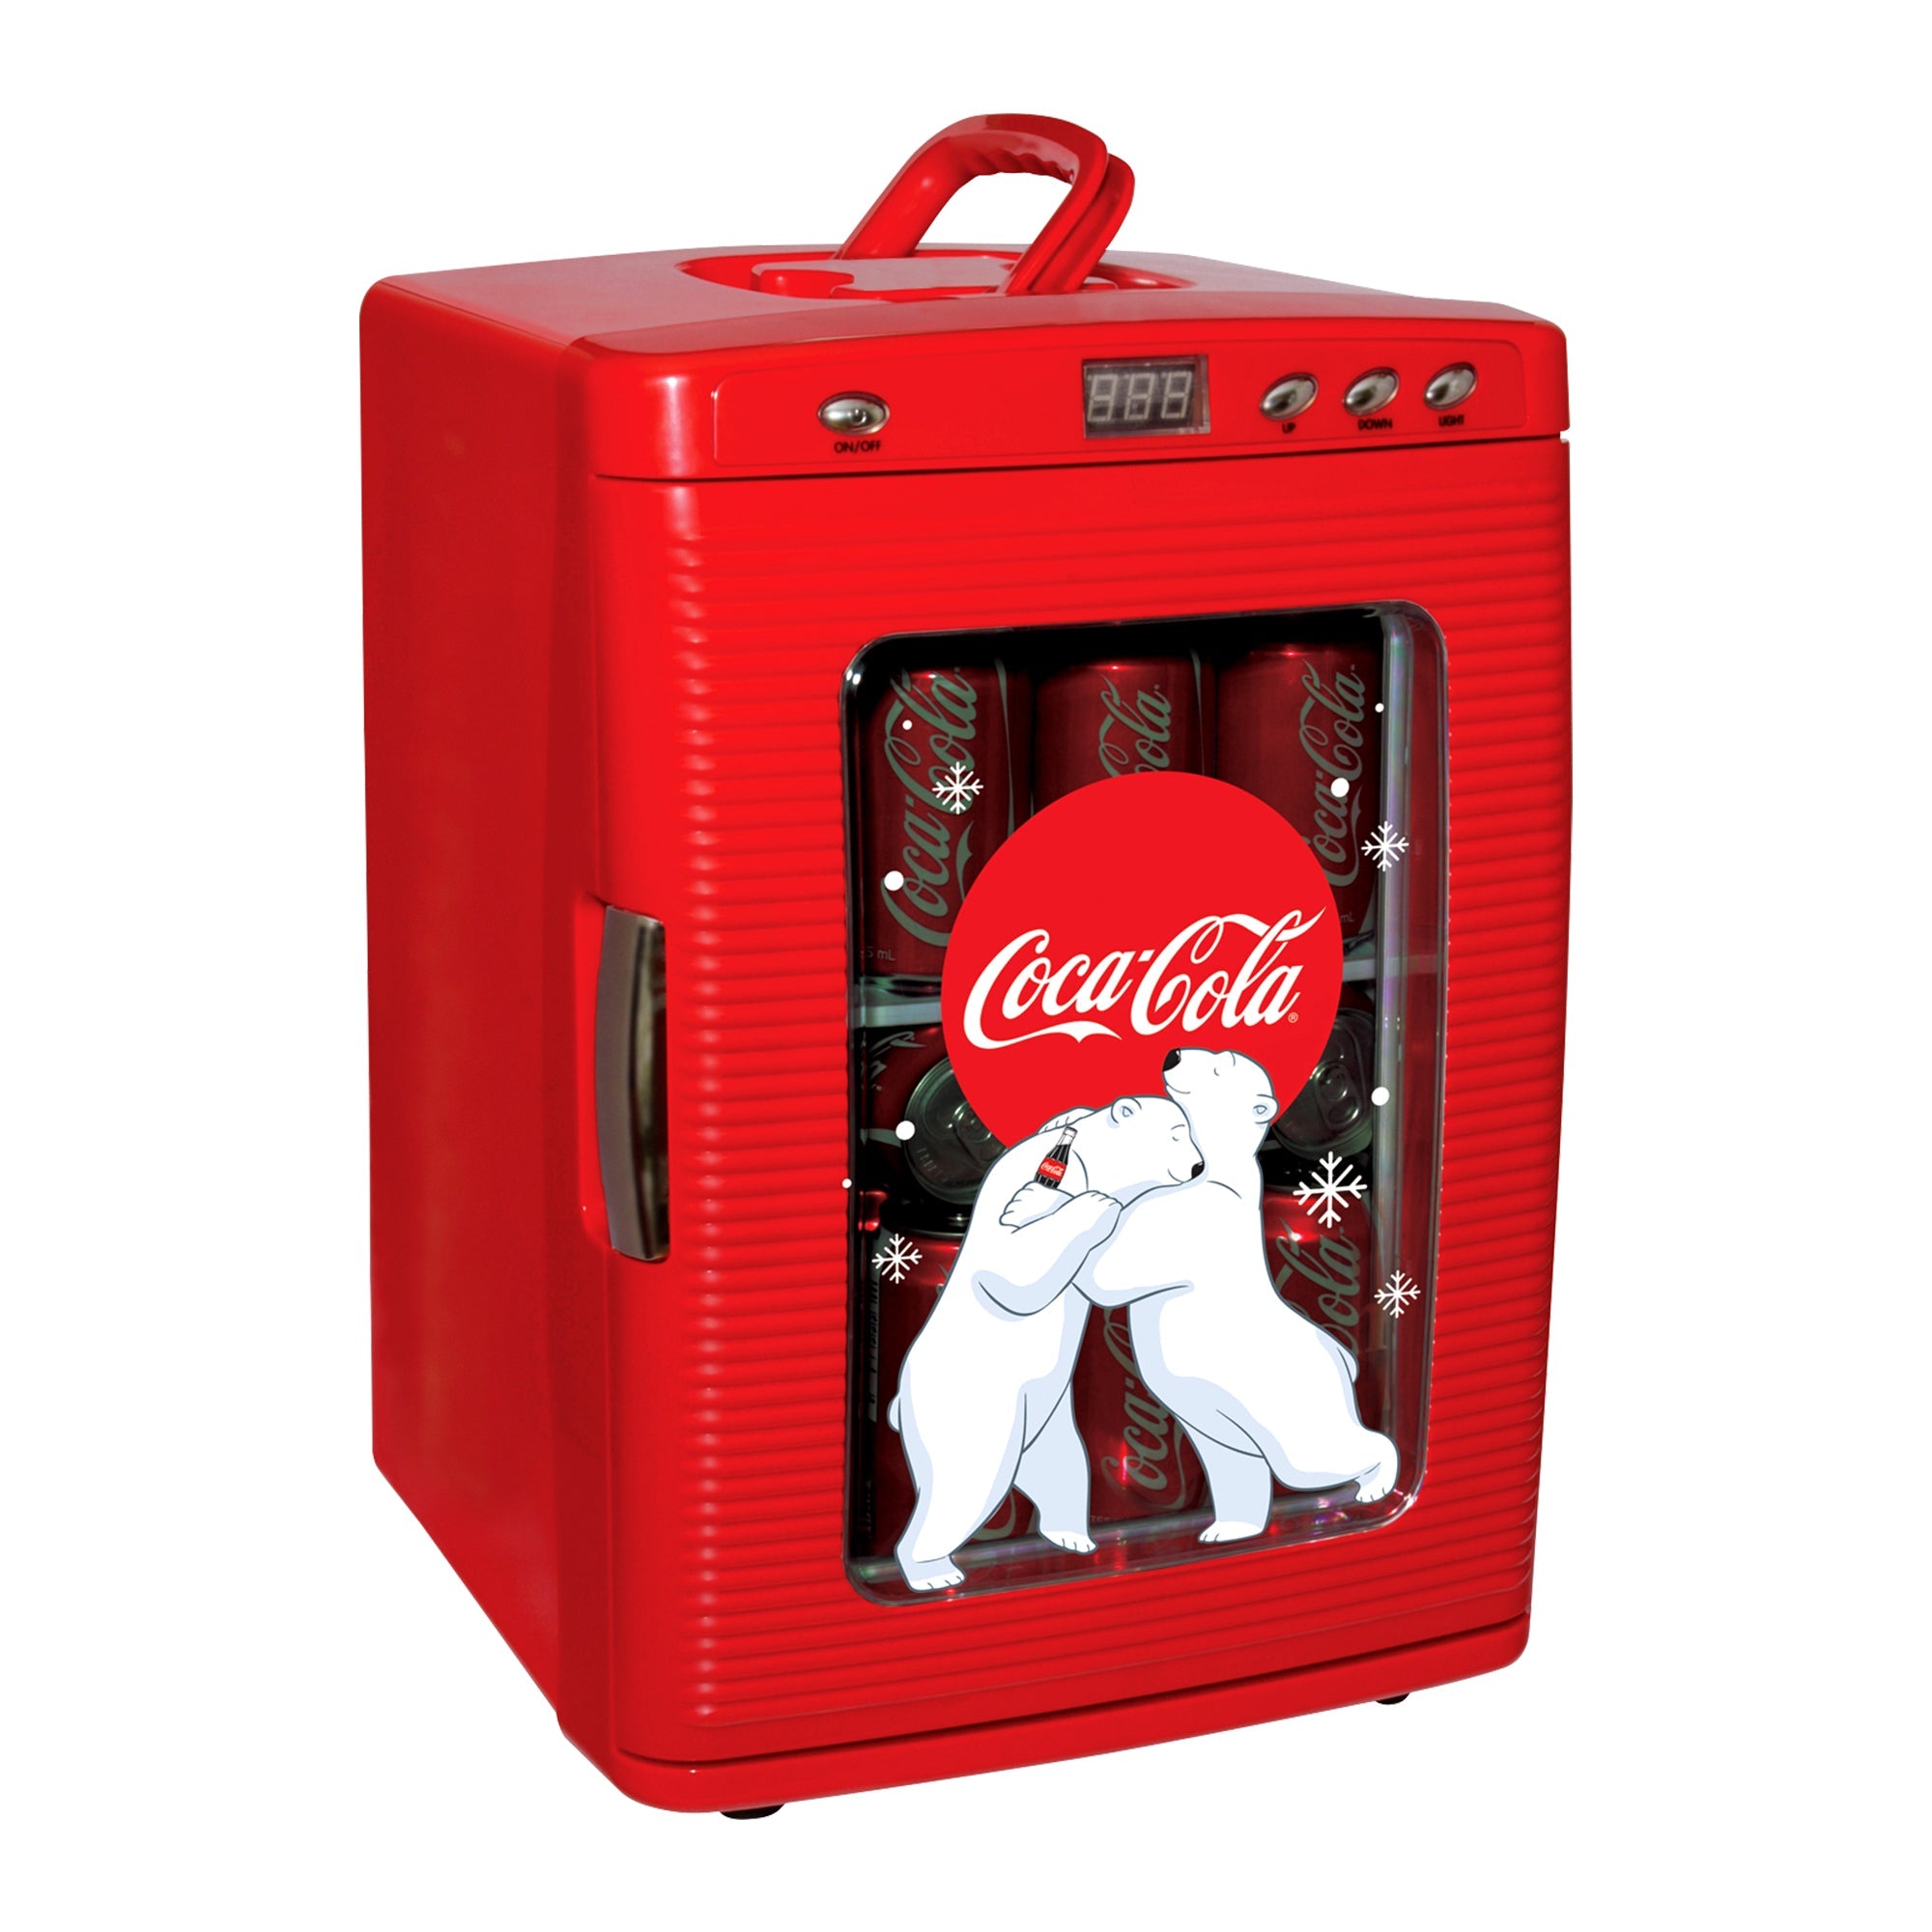 Product shot of Coca-Cola 28 can mini fridge with display window filled with cans of Coke on a white background